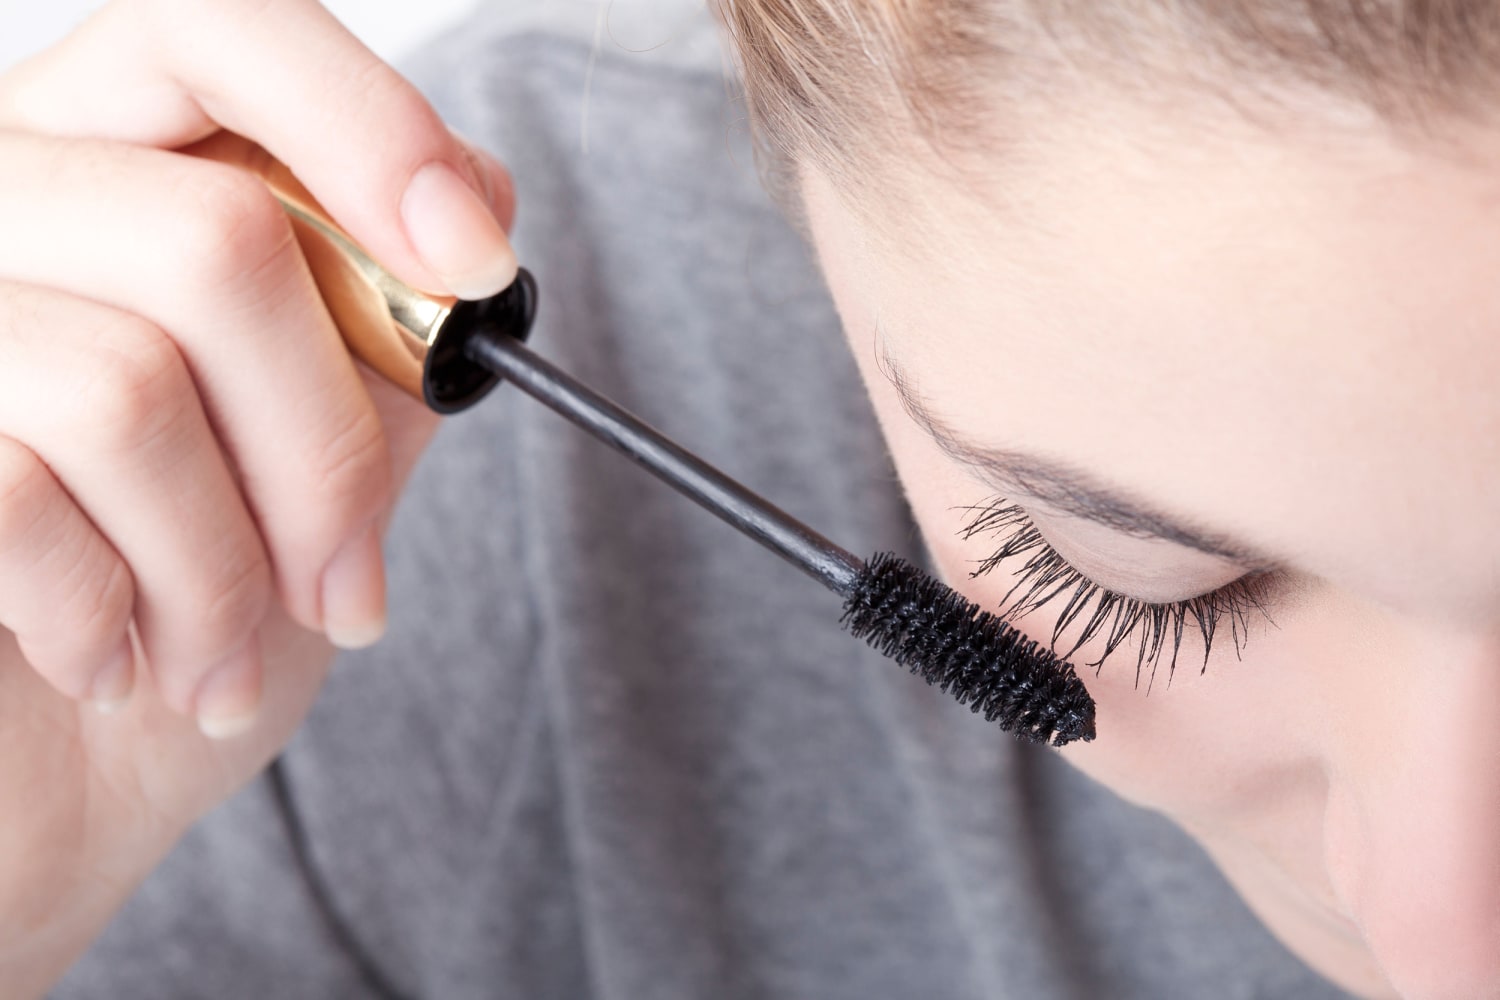 How To Apply Mascara Correctly According To Top Makeup Artists